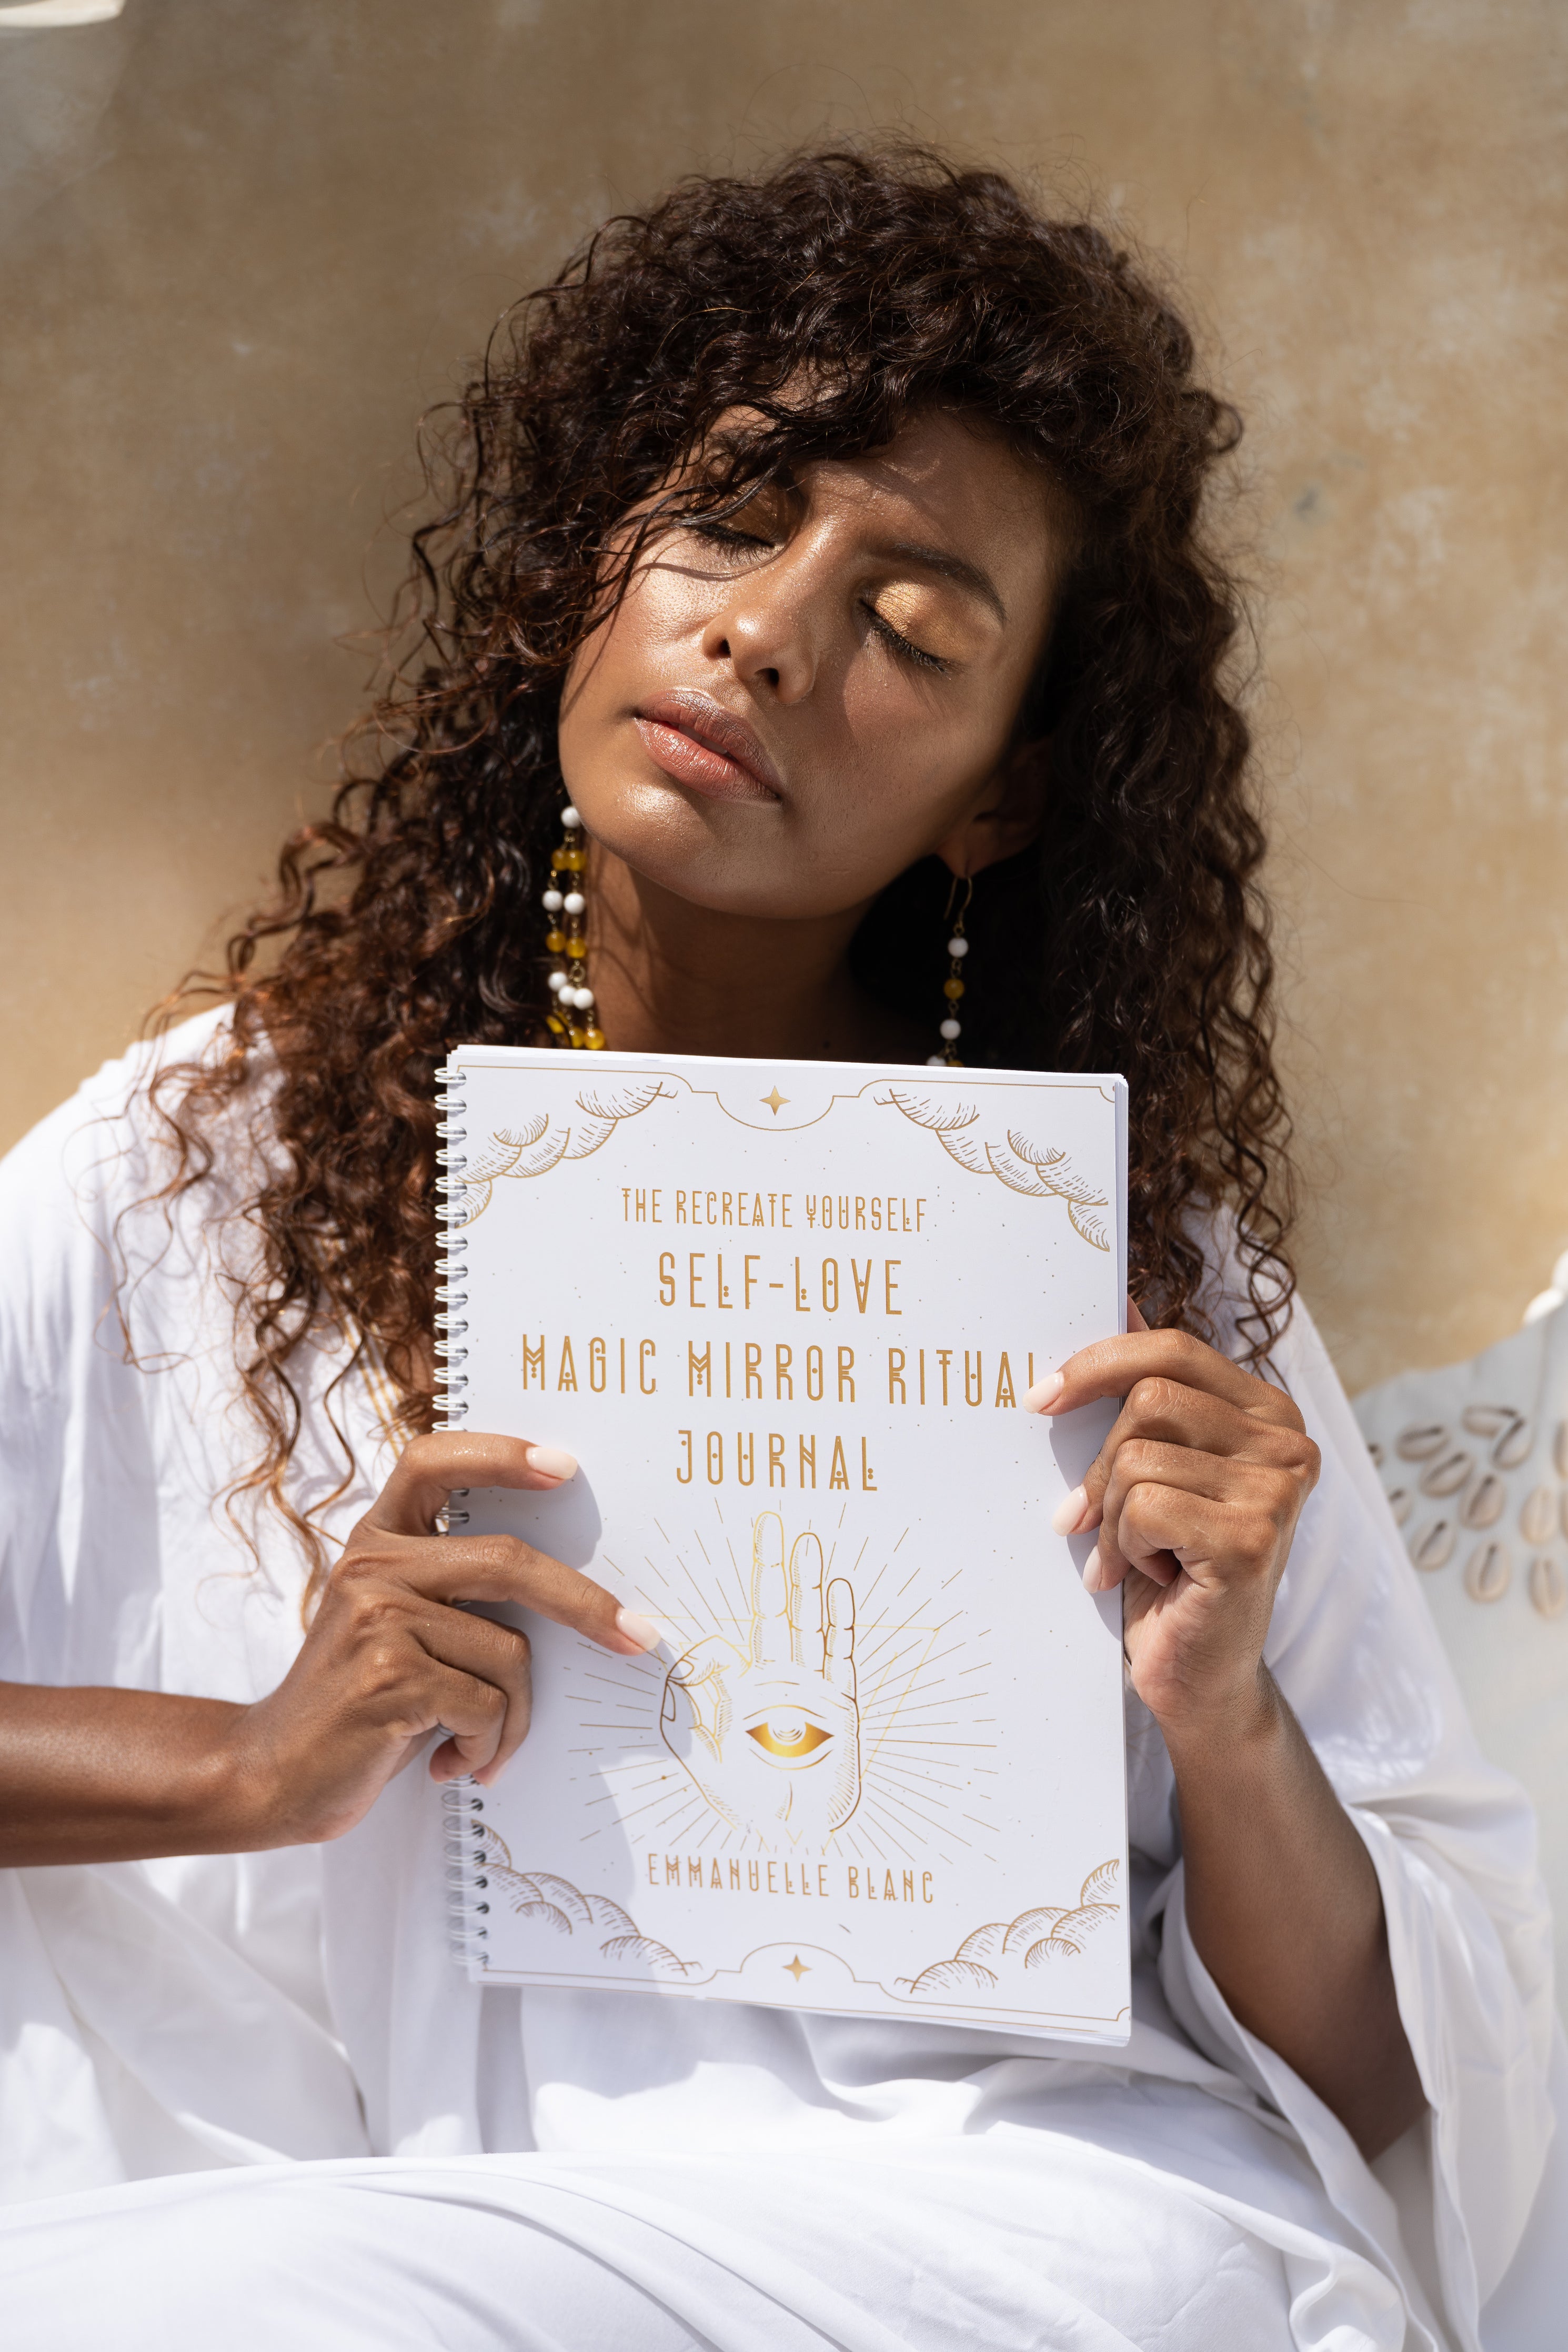 The Self-Love Magic Mirror Ritual journal is more than just a journal; it is a mystical and transformative gateway into the deepest realms of your soul from Unleash Your Inner Wealth created by Emmanuelle Blanc 